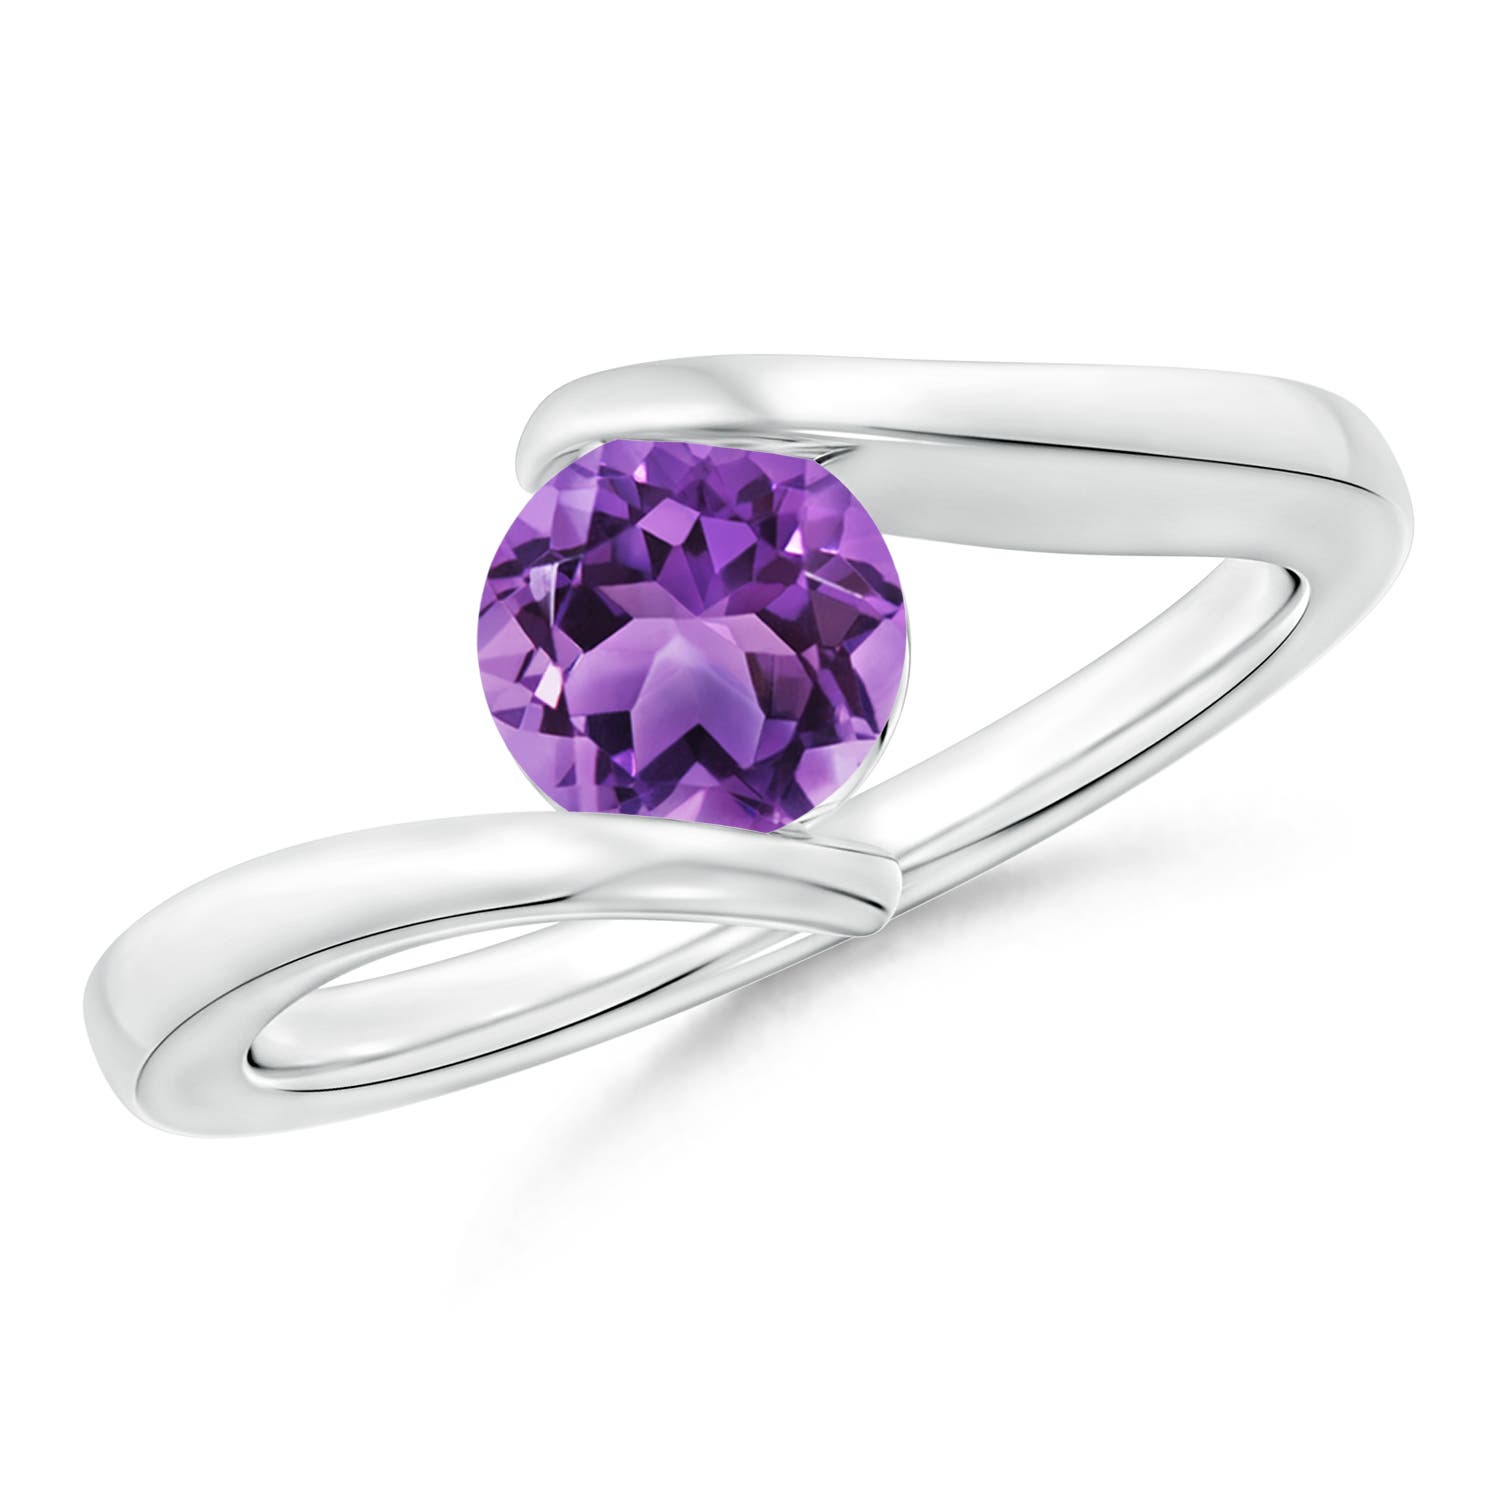 AA - Amethyst / 0.8 CT / 14 KT White Gold